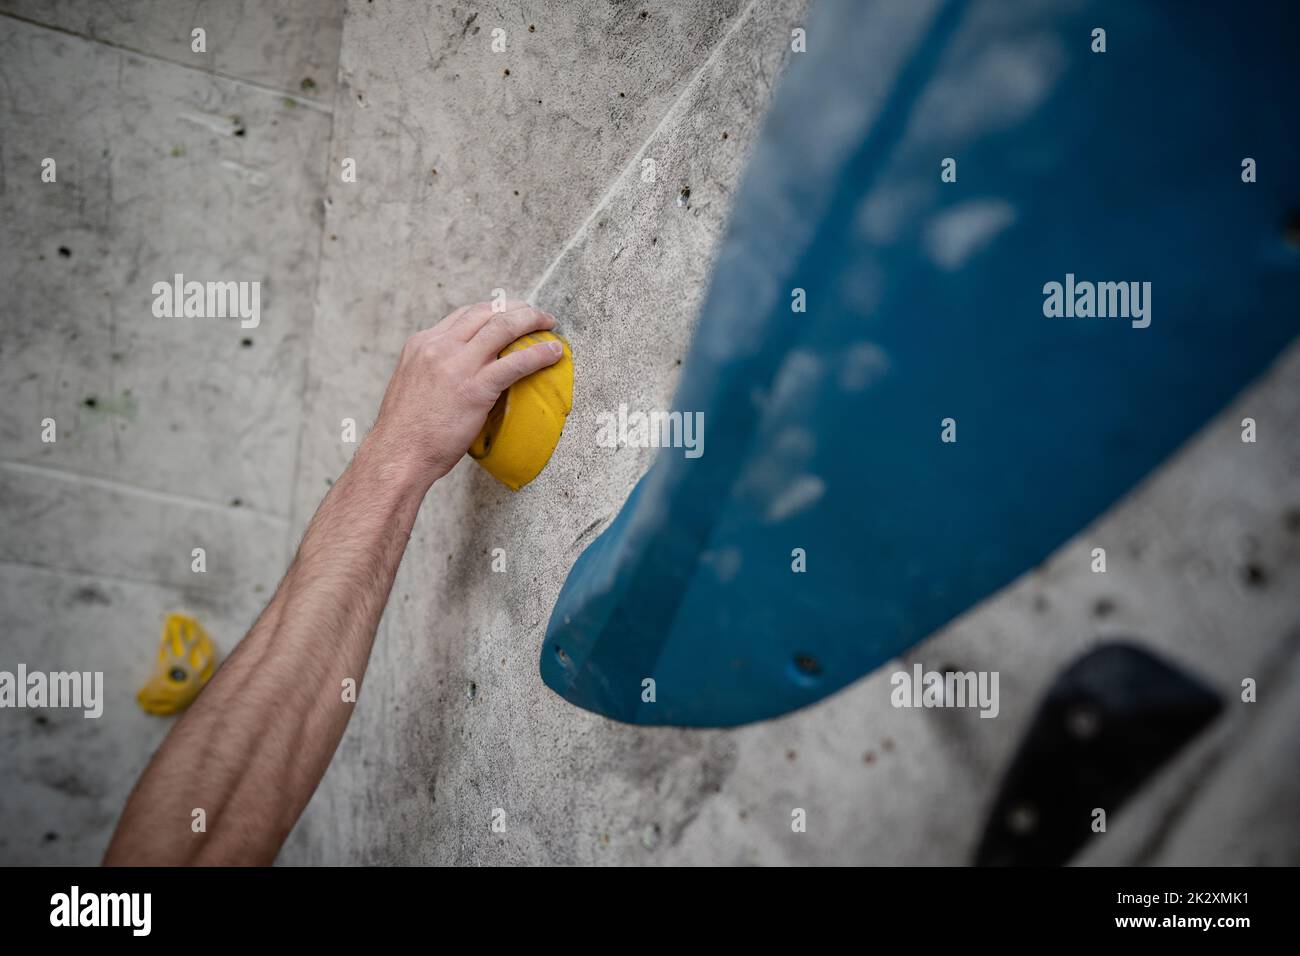 Male hands smeared with magnesium powder grabbing a hold of a climbing wall Stock Photo